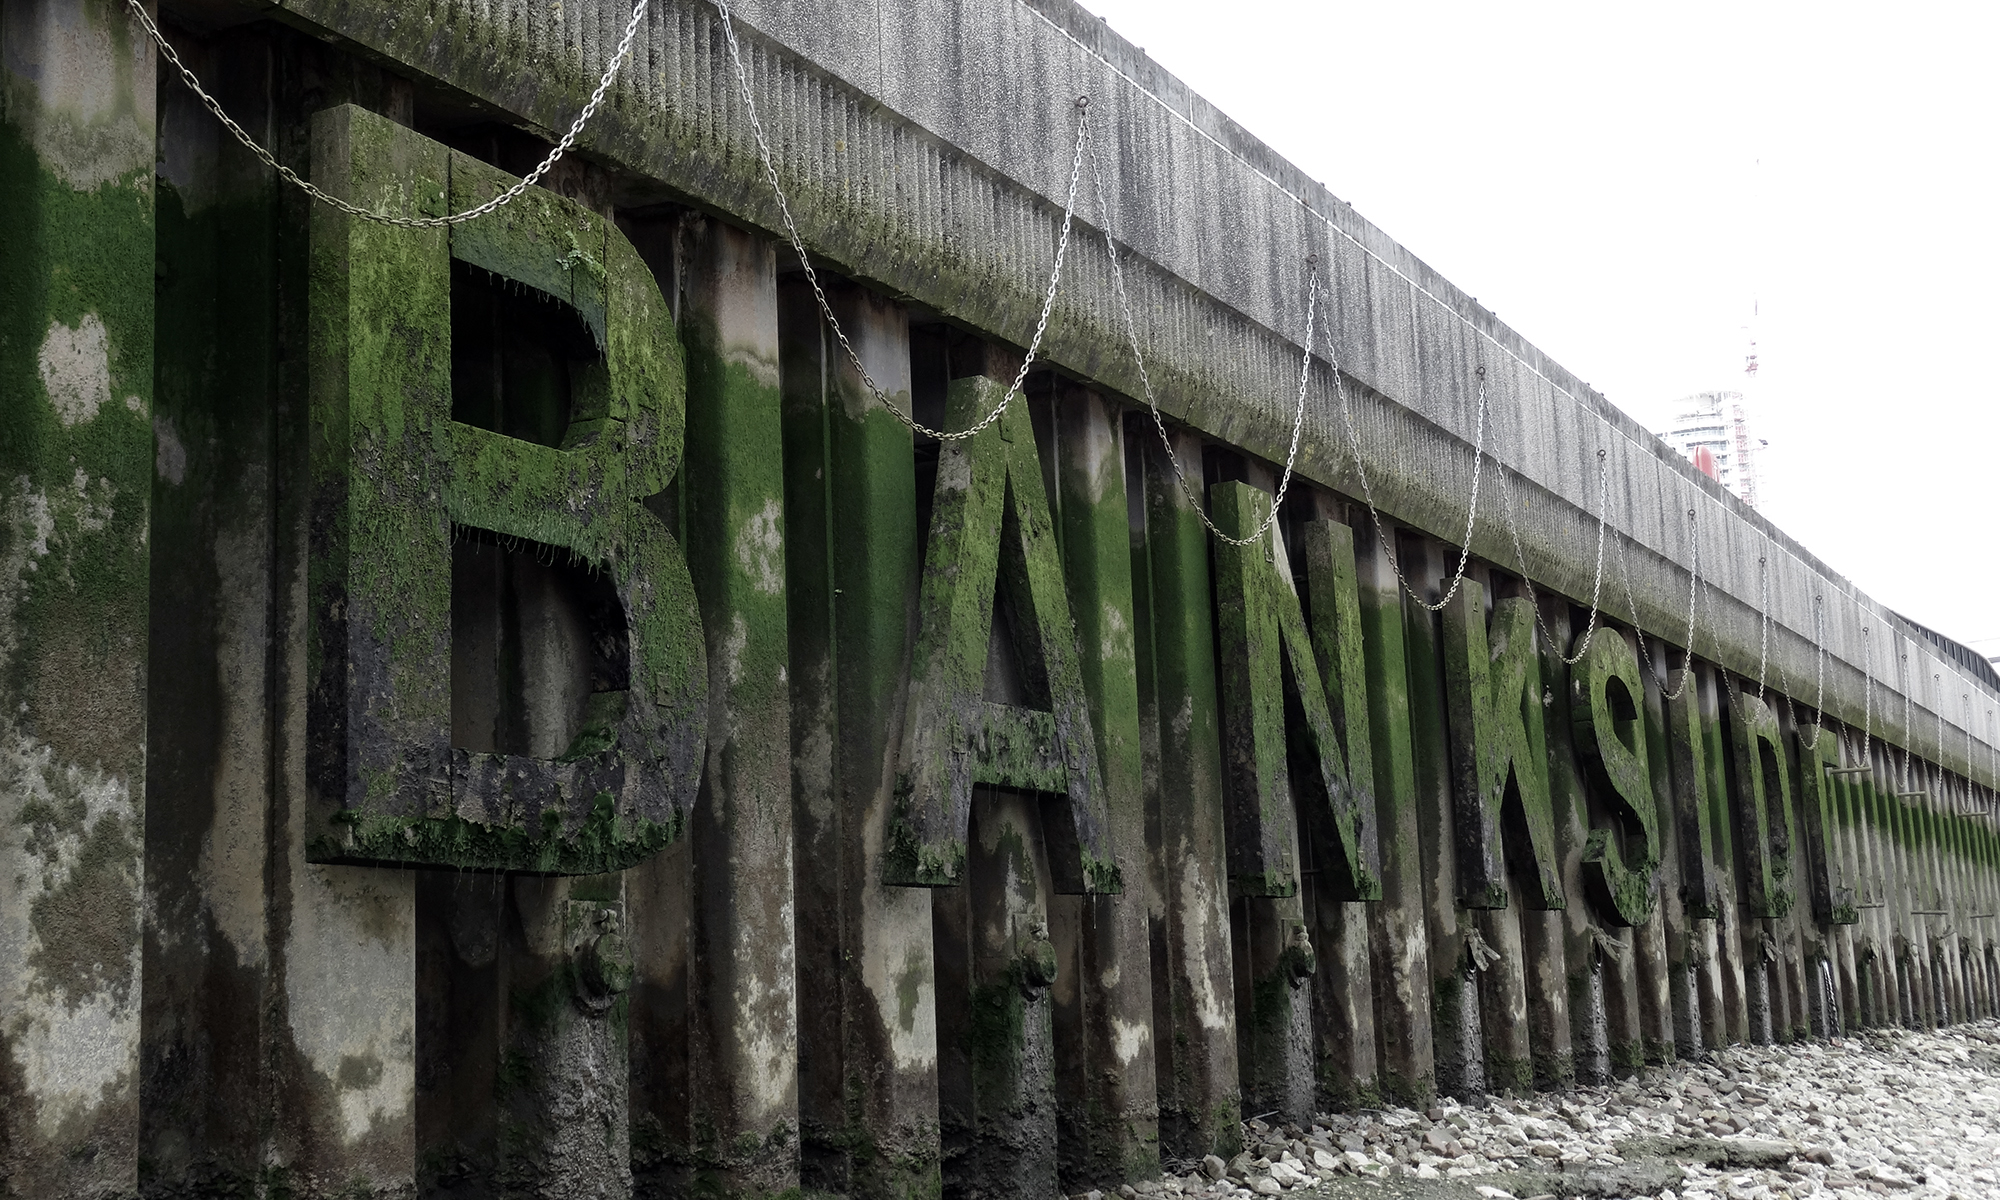 Large algae-covered letters spell out 'BANKSIDE' fixed to the riverbank wall.